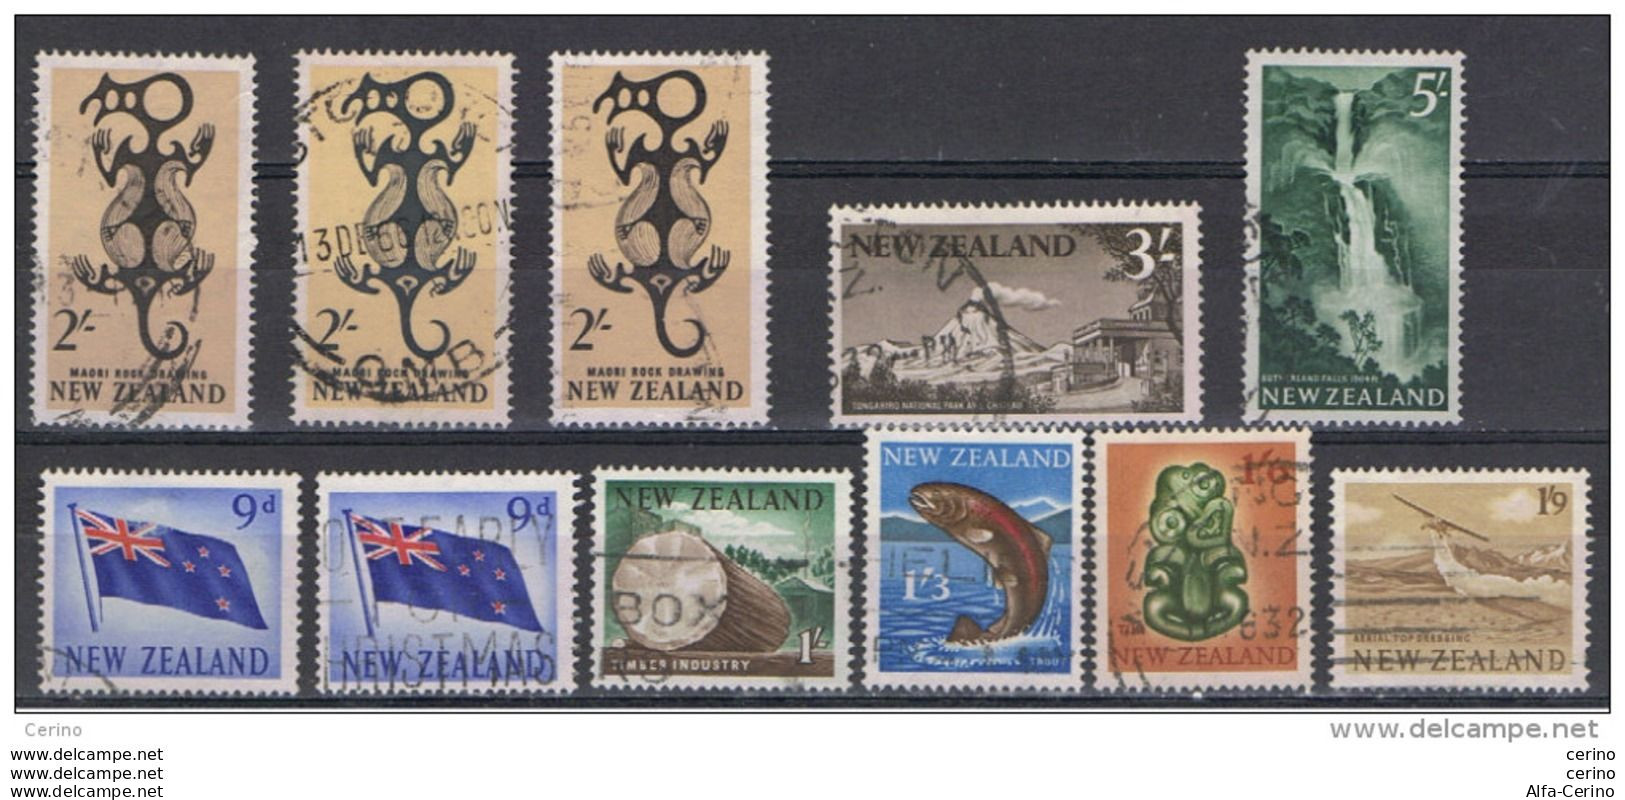 NEW  ZEALAND:  1960/62  LOT  11  USED  REP.  STAMPS  -  YV/TELL. 391//399 - Usati